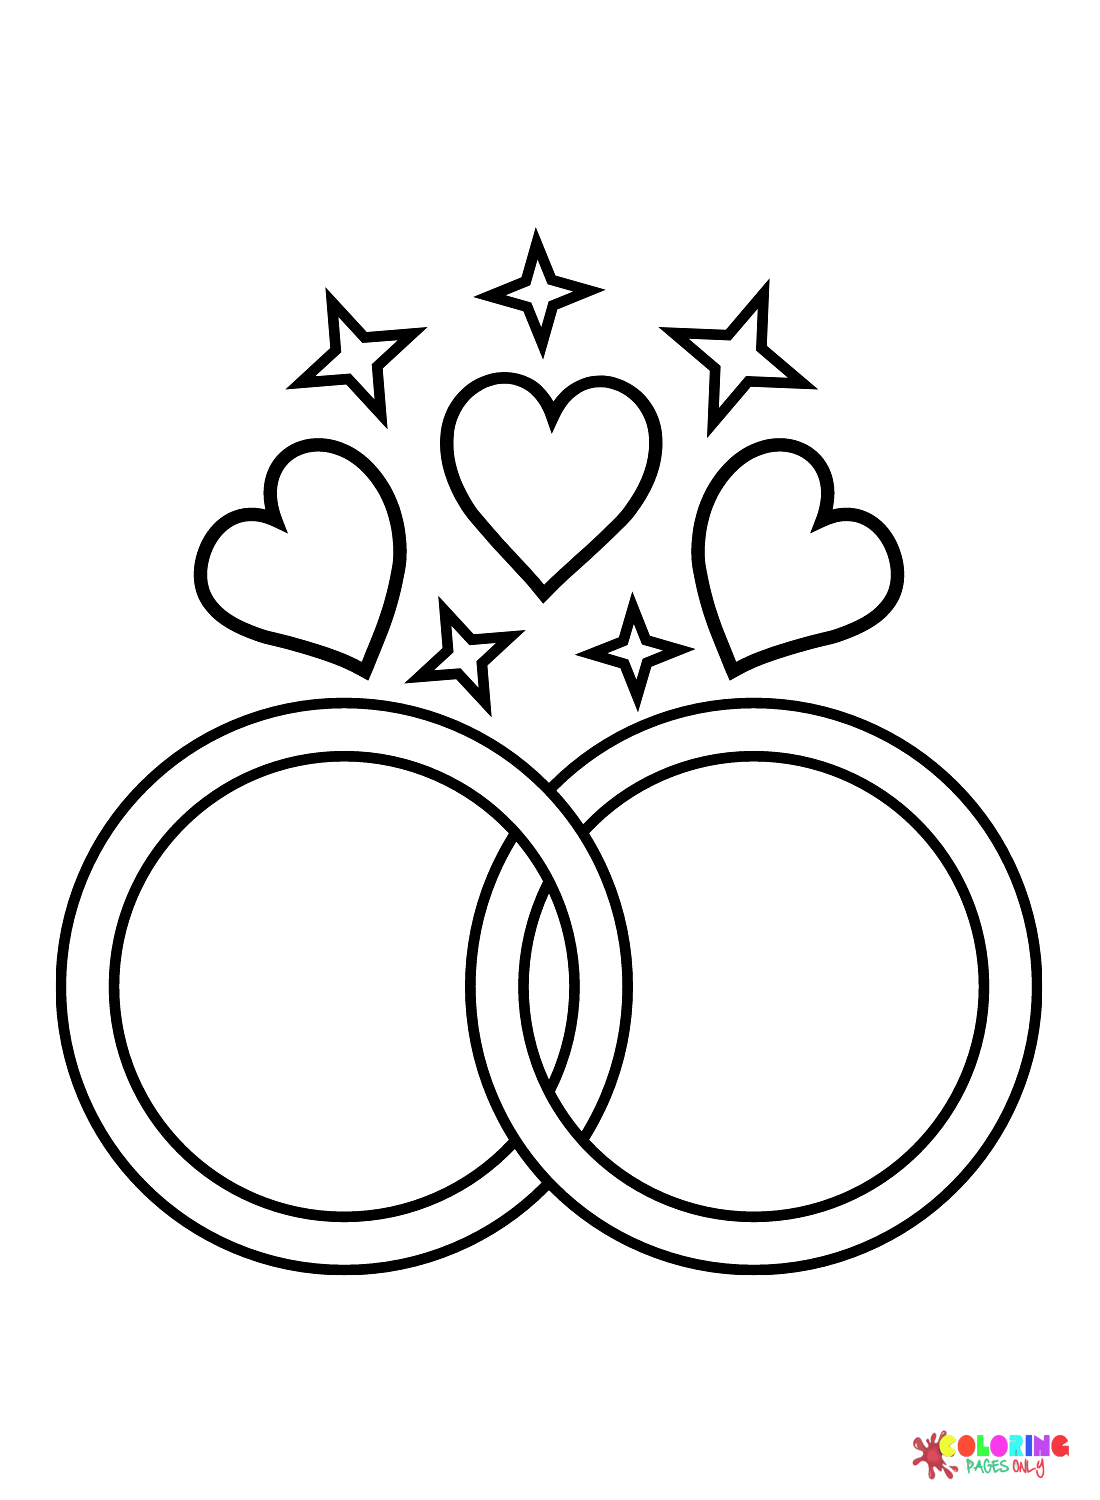 Wedding Rings with Hearts and Star from Wedding Ring